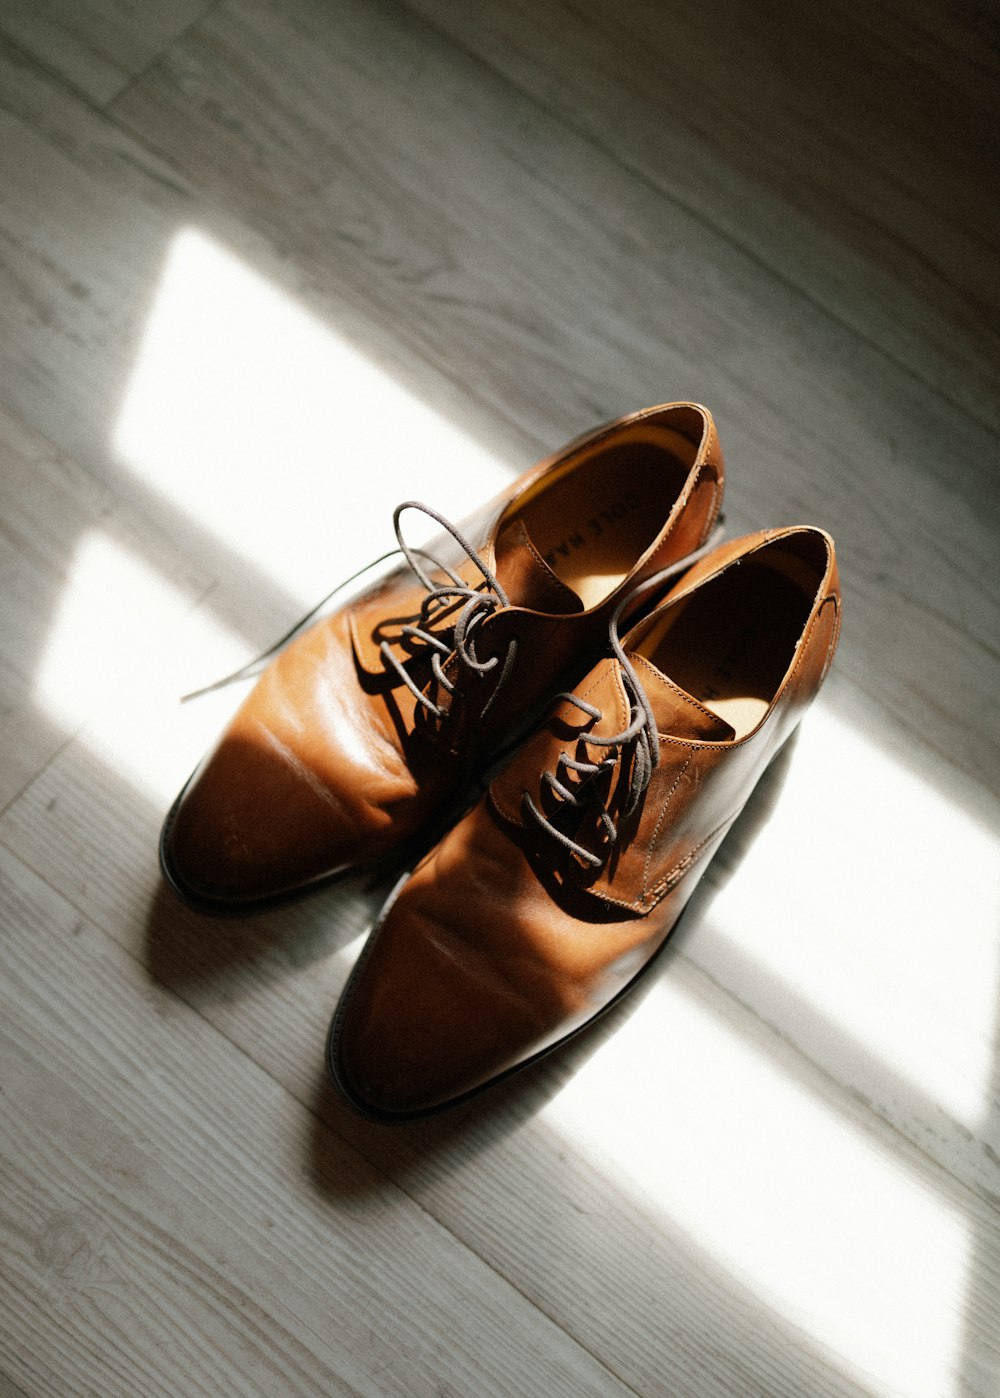 a pair of brown shoes sitting on top of a wooden floor